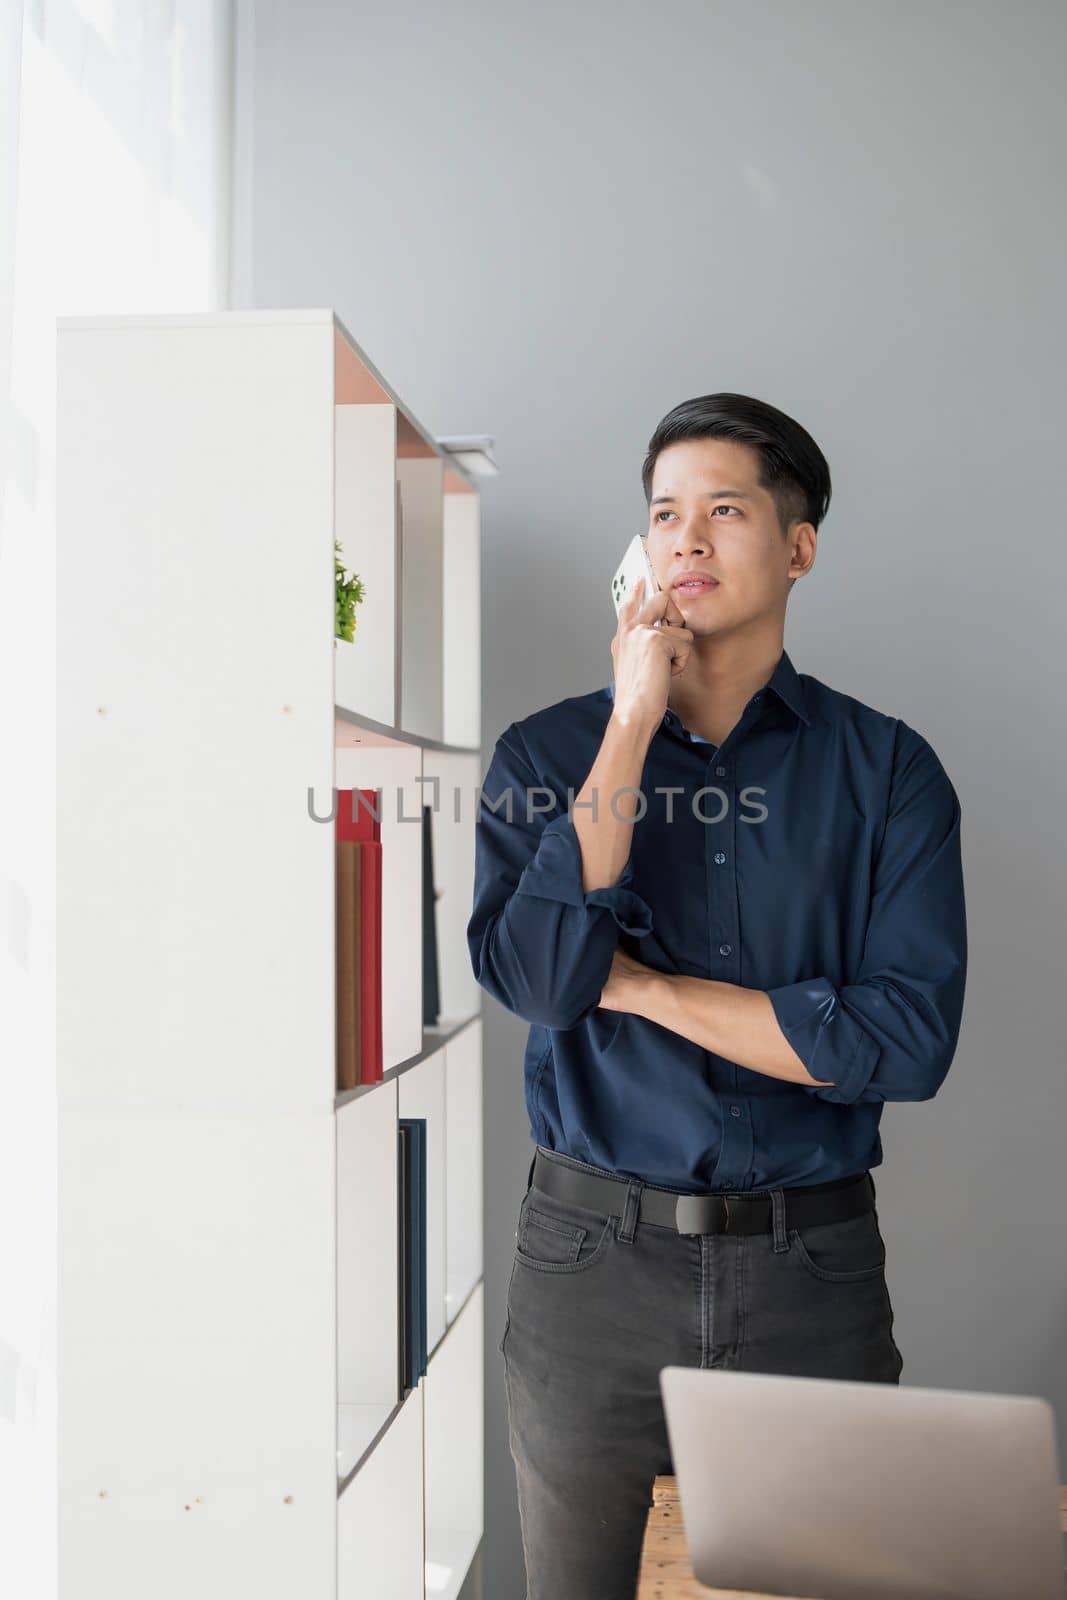 A young Asian businessman stands on the office of a window talking on the phone...